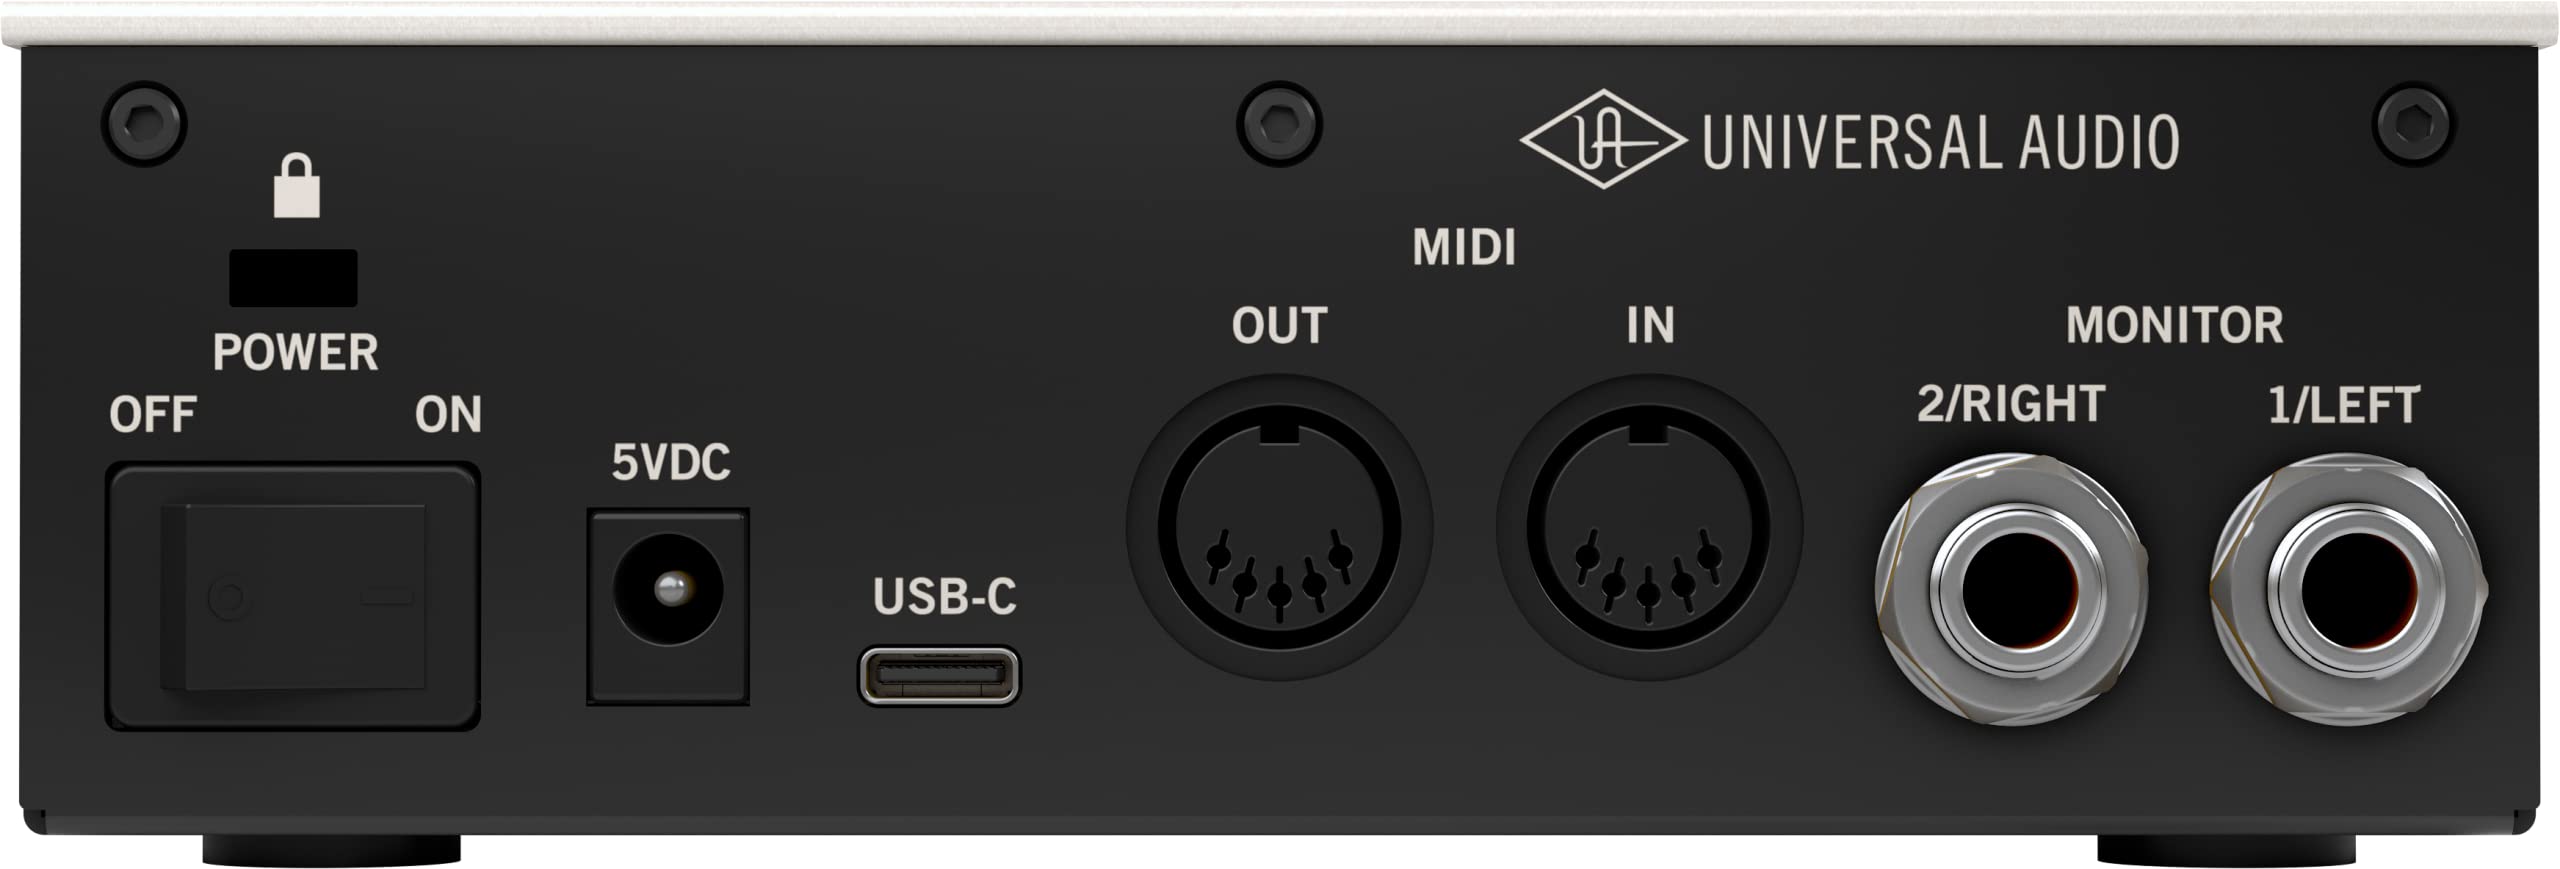 streaming　Volt　recording,　476　Audio　UA　essential　$400　audio　Interface　USB　in　and　plug-ins　for　podcasting,　including　with　software,　UAD